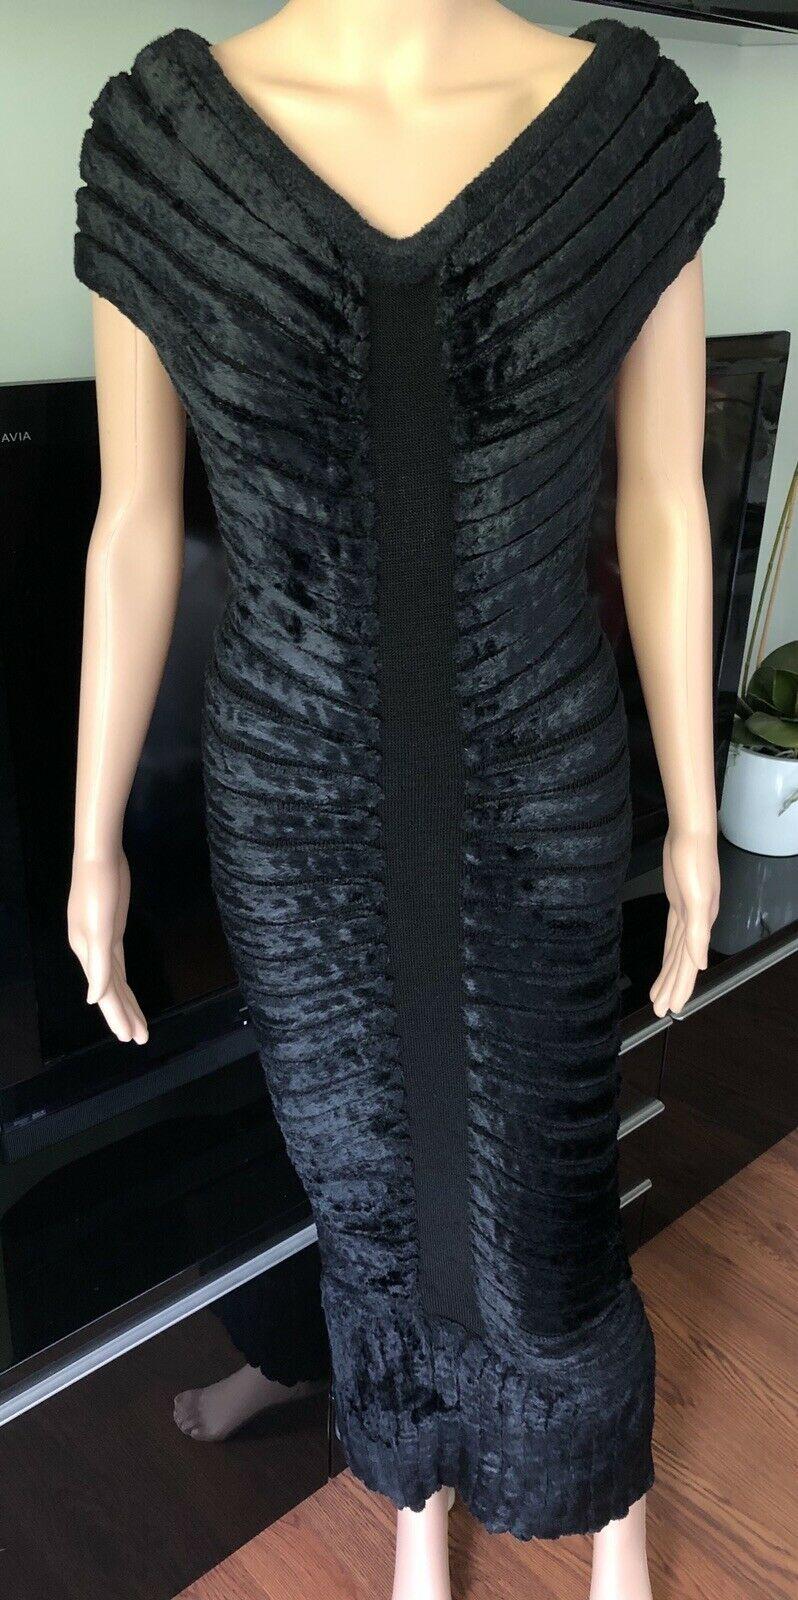 Azzedine Alaia S/S 1994 Vintage Black Long Chenille Dress Size XS

Black Alaïa sleeveless maxi dress with scoop neck and zip closure at center back.

All Eyes on Alaïa

For the last half-century, the world’s most fashionable and adventuresome women